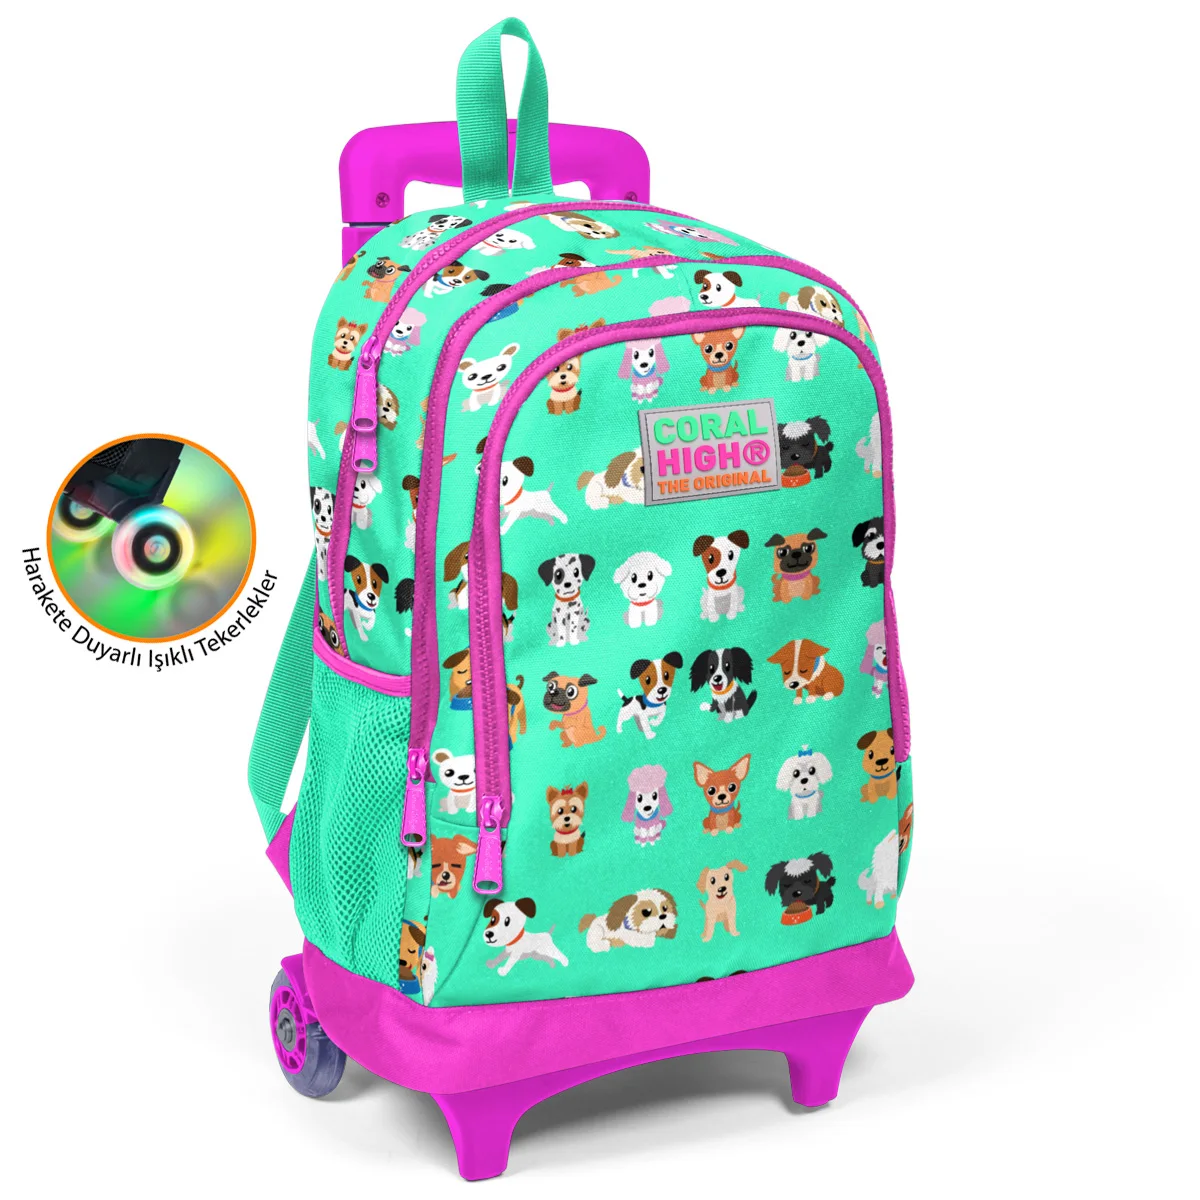 

Trolley school bag coral high water green dog patterned luminous wheel two-compartment backpack stationery products